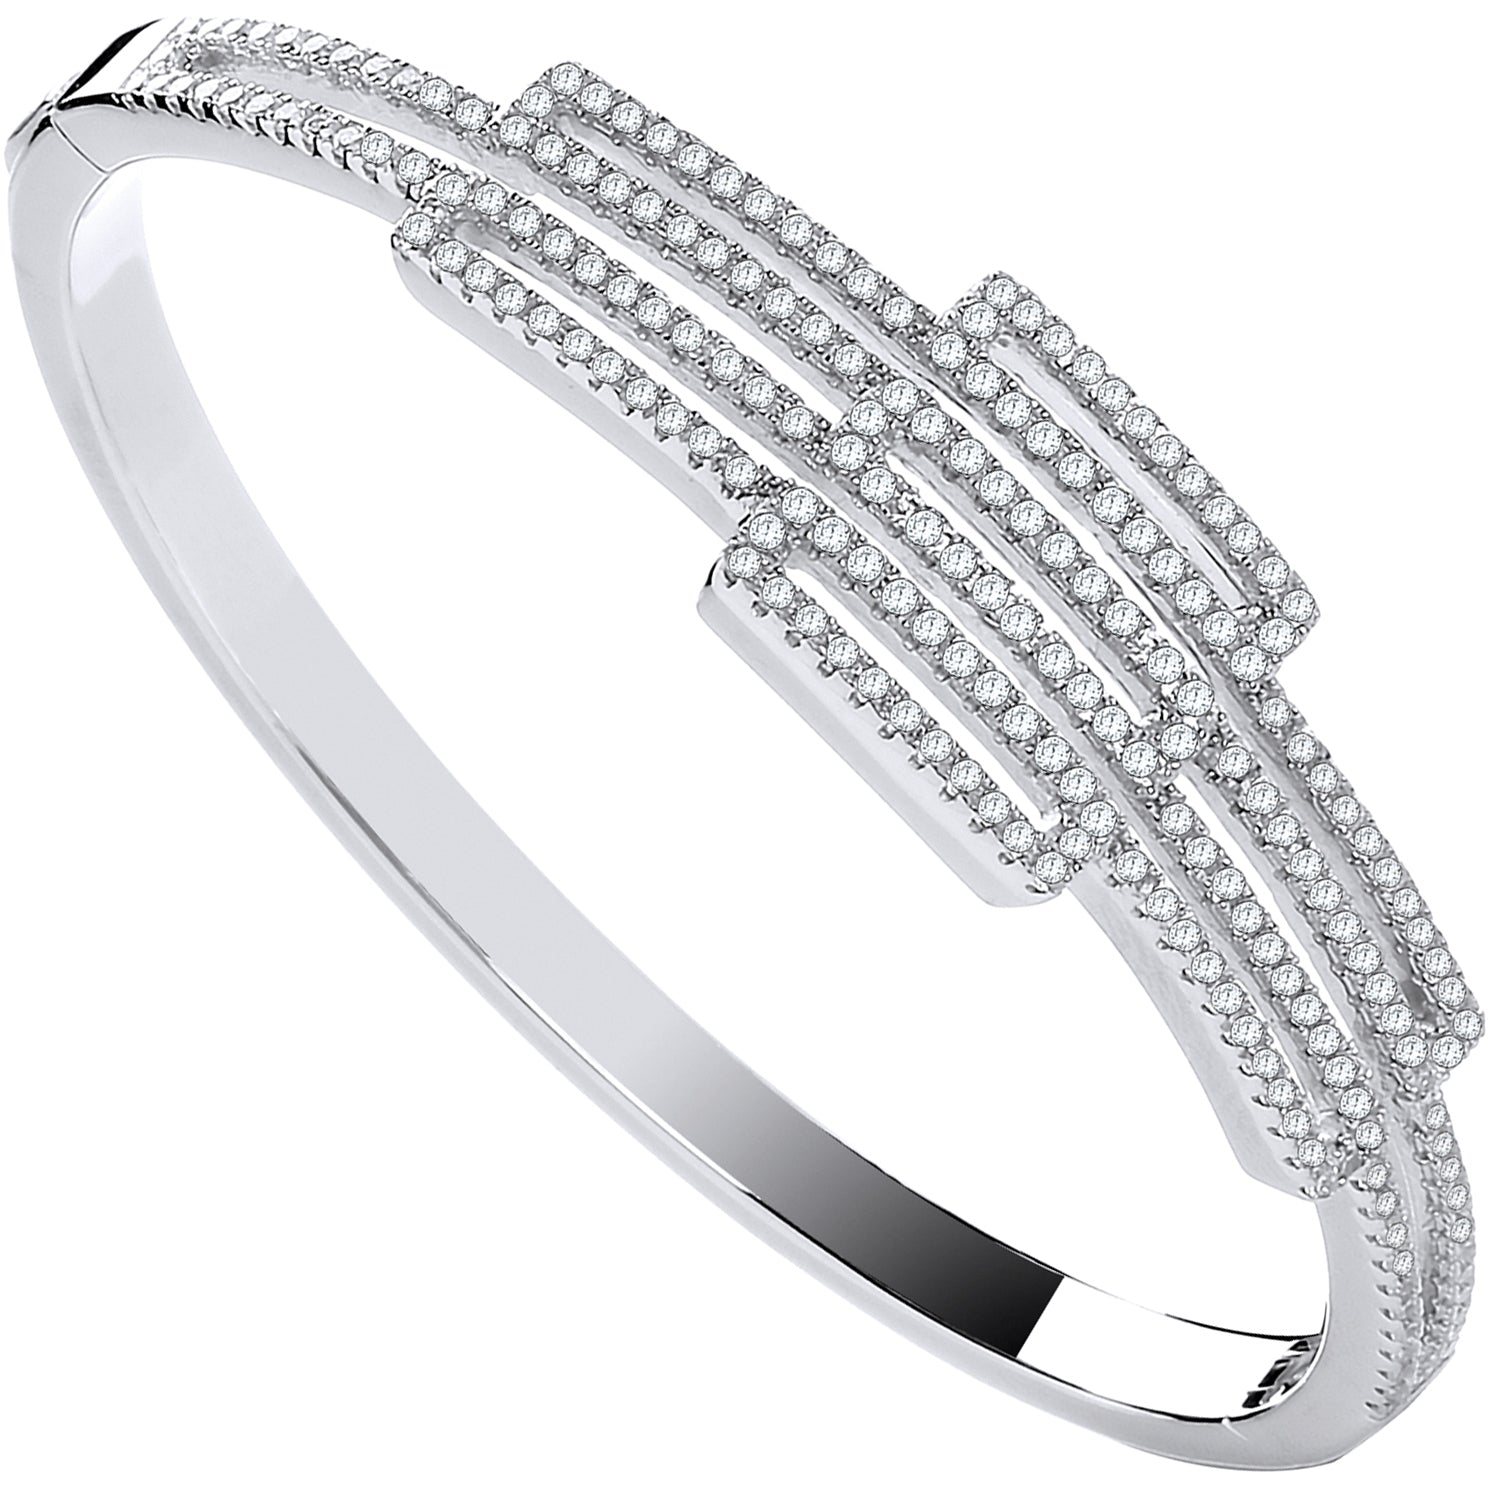 Silver Cubic Zirconia Rectangles Fancy Bangle